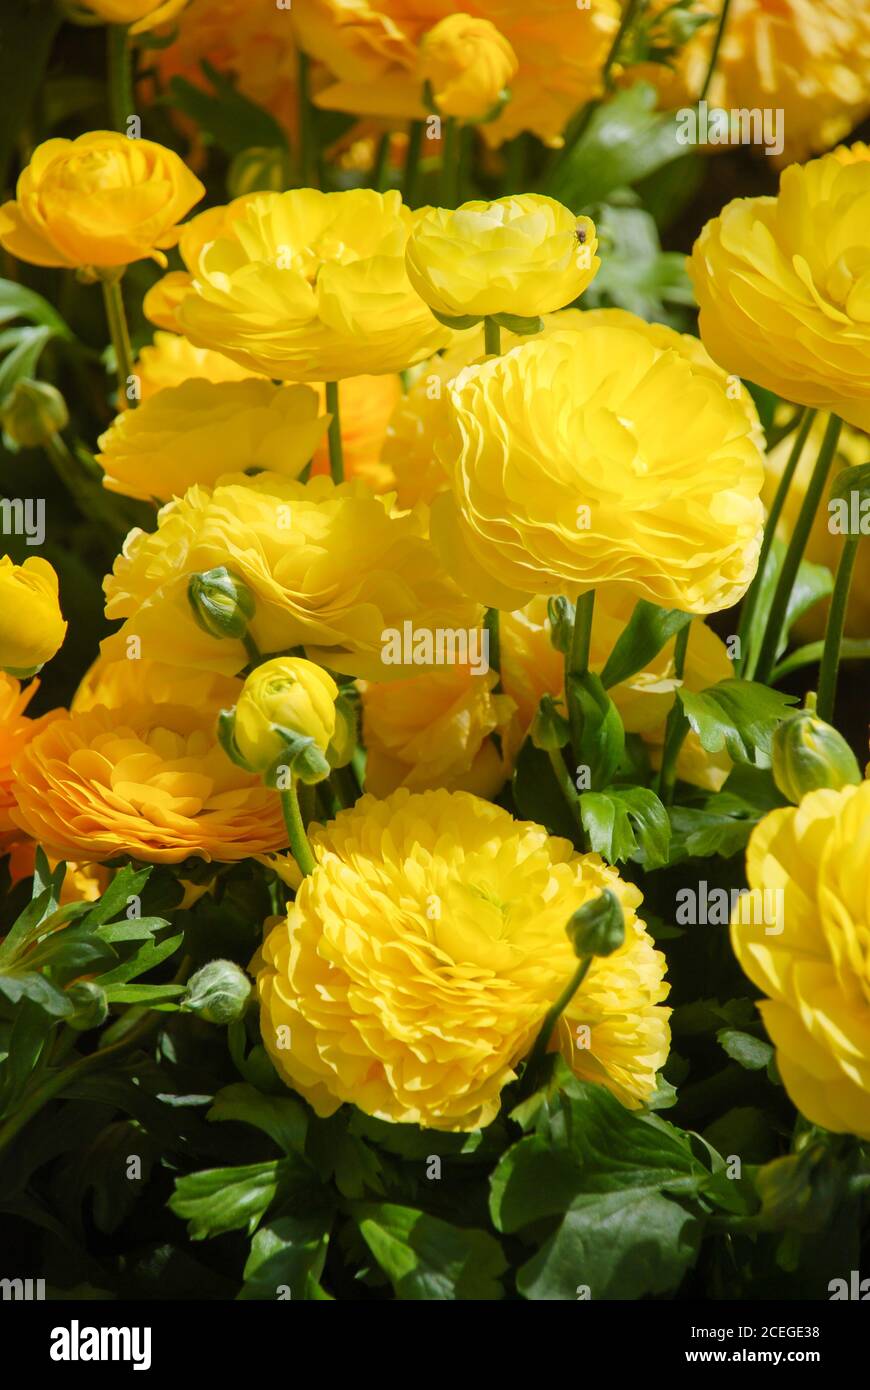 Ranunculus flora. A blossomed yellow flower with detailed petals shot, potted plant Stock Photo